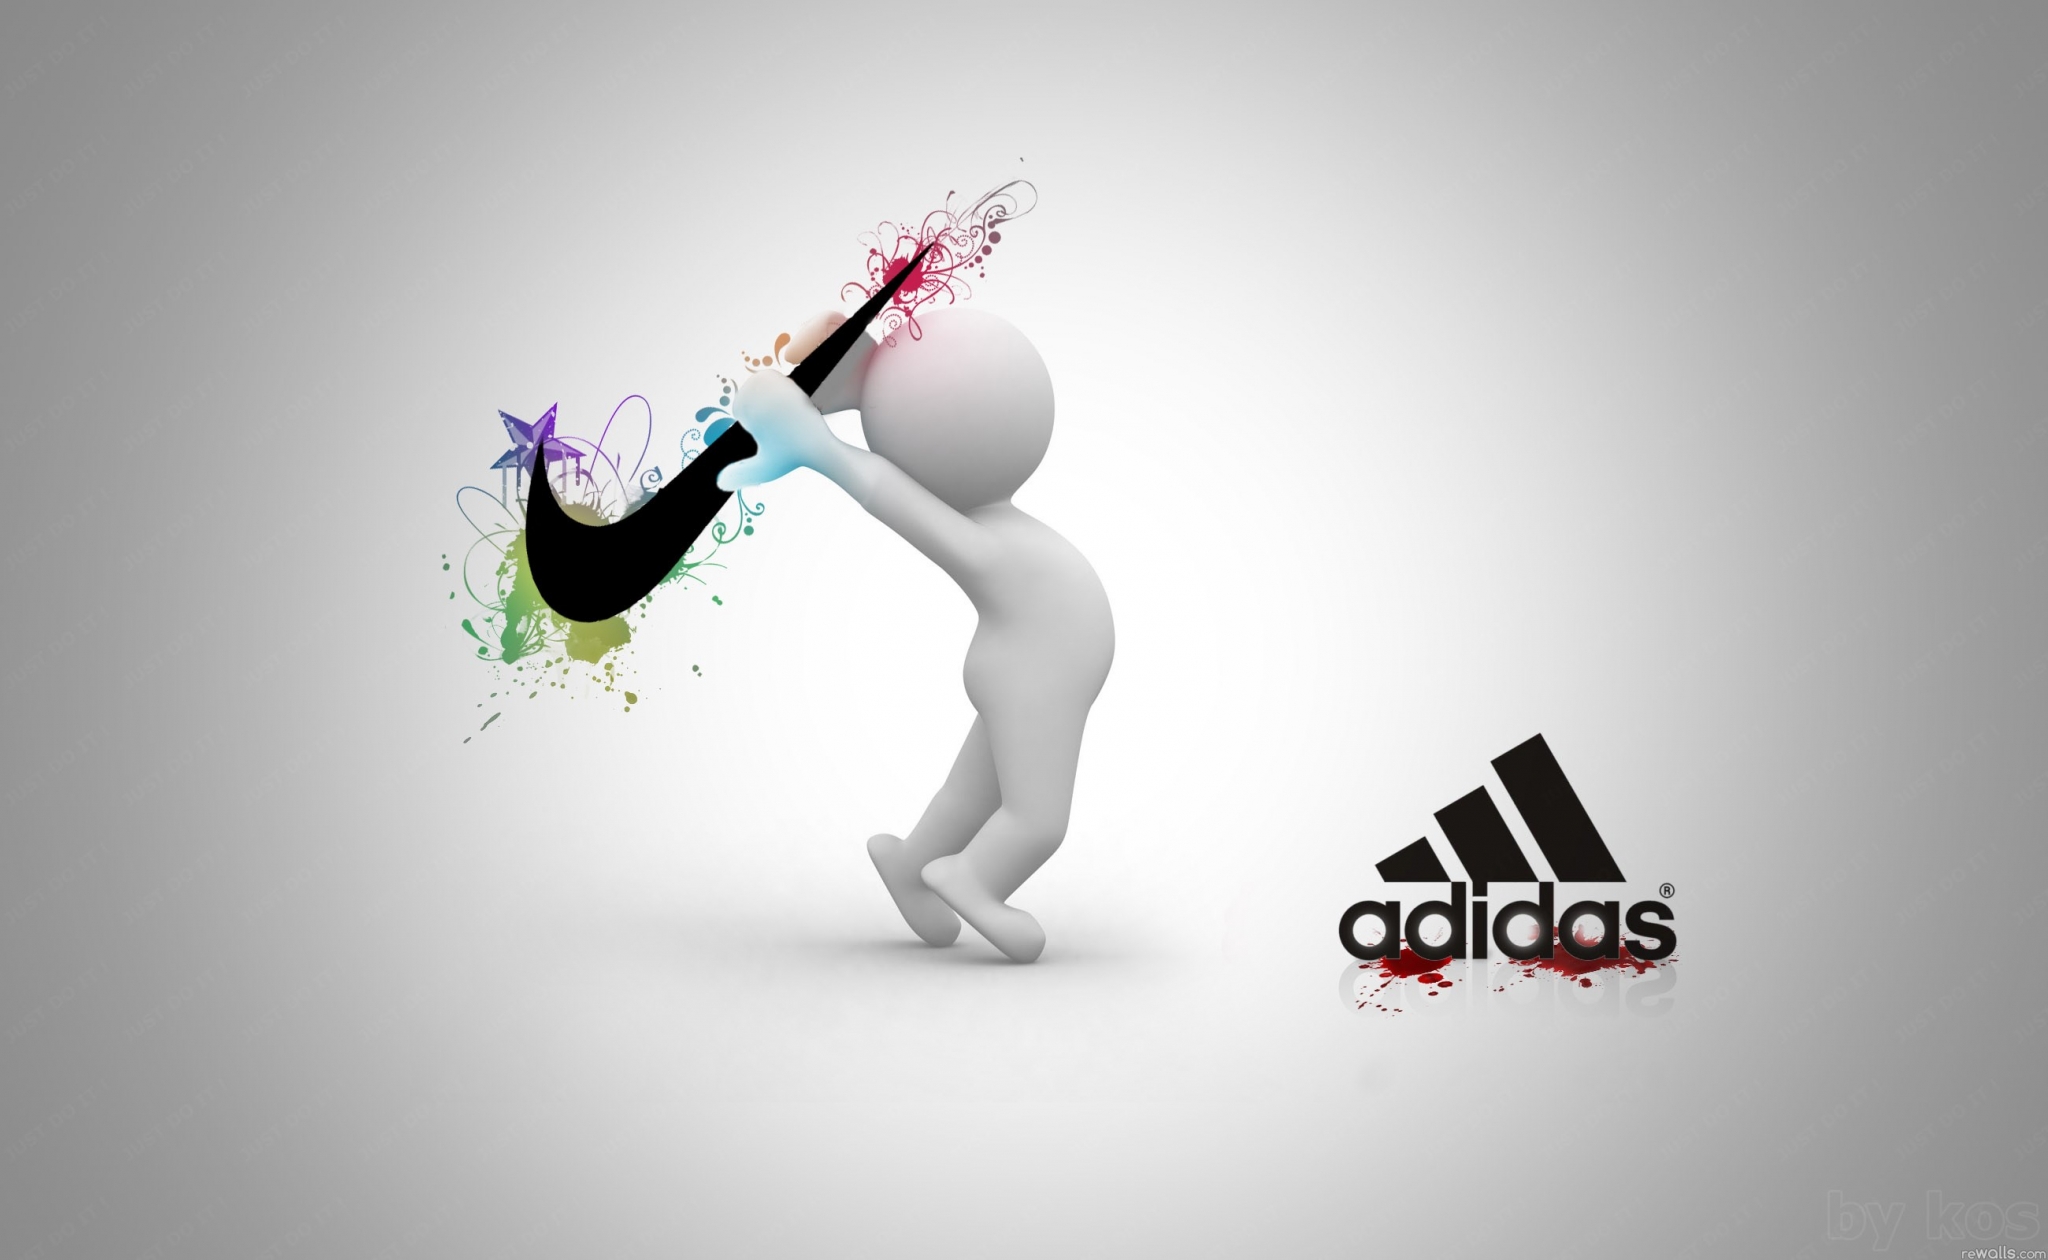 Adidas backgrounds images p k k hd wallpapers backgrounds free download rare gallery